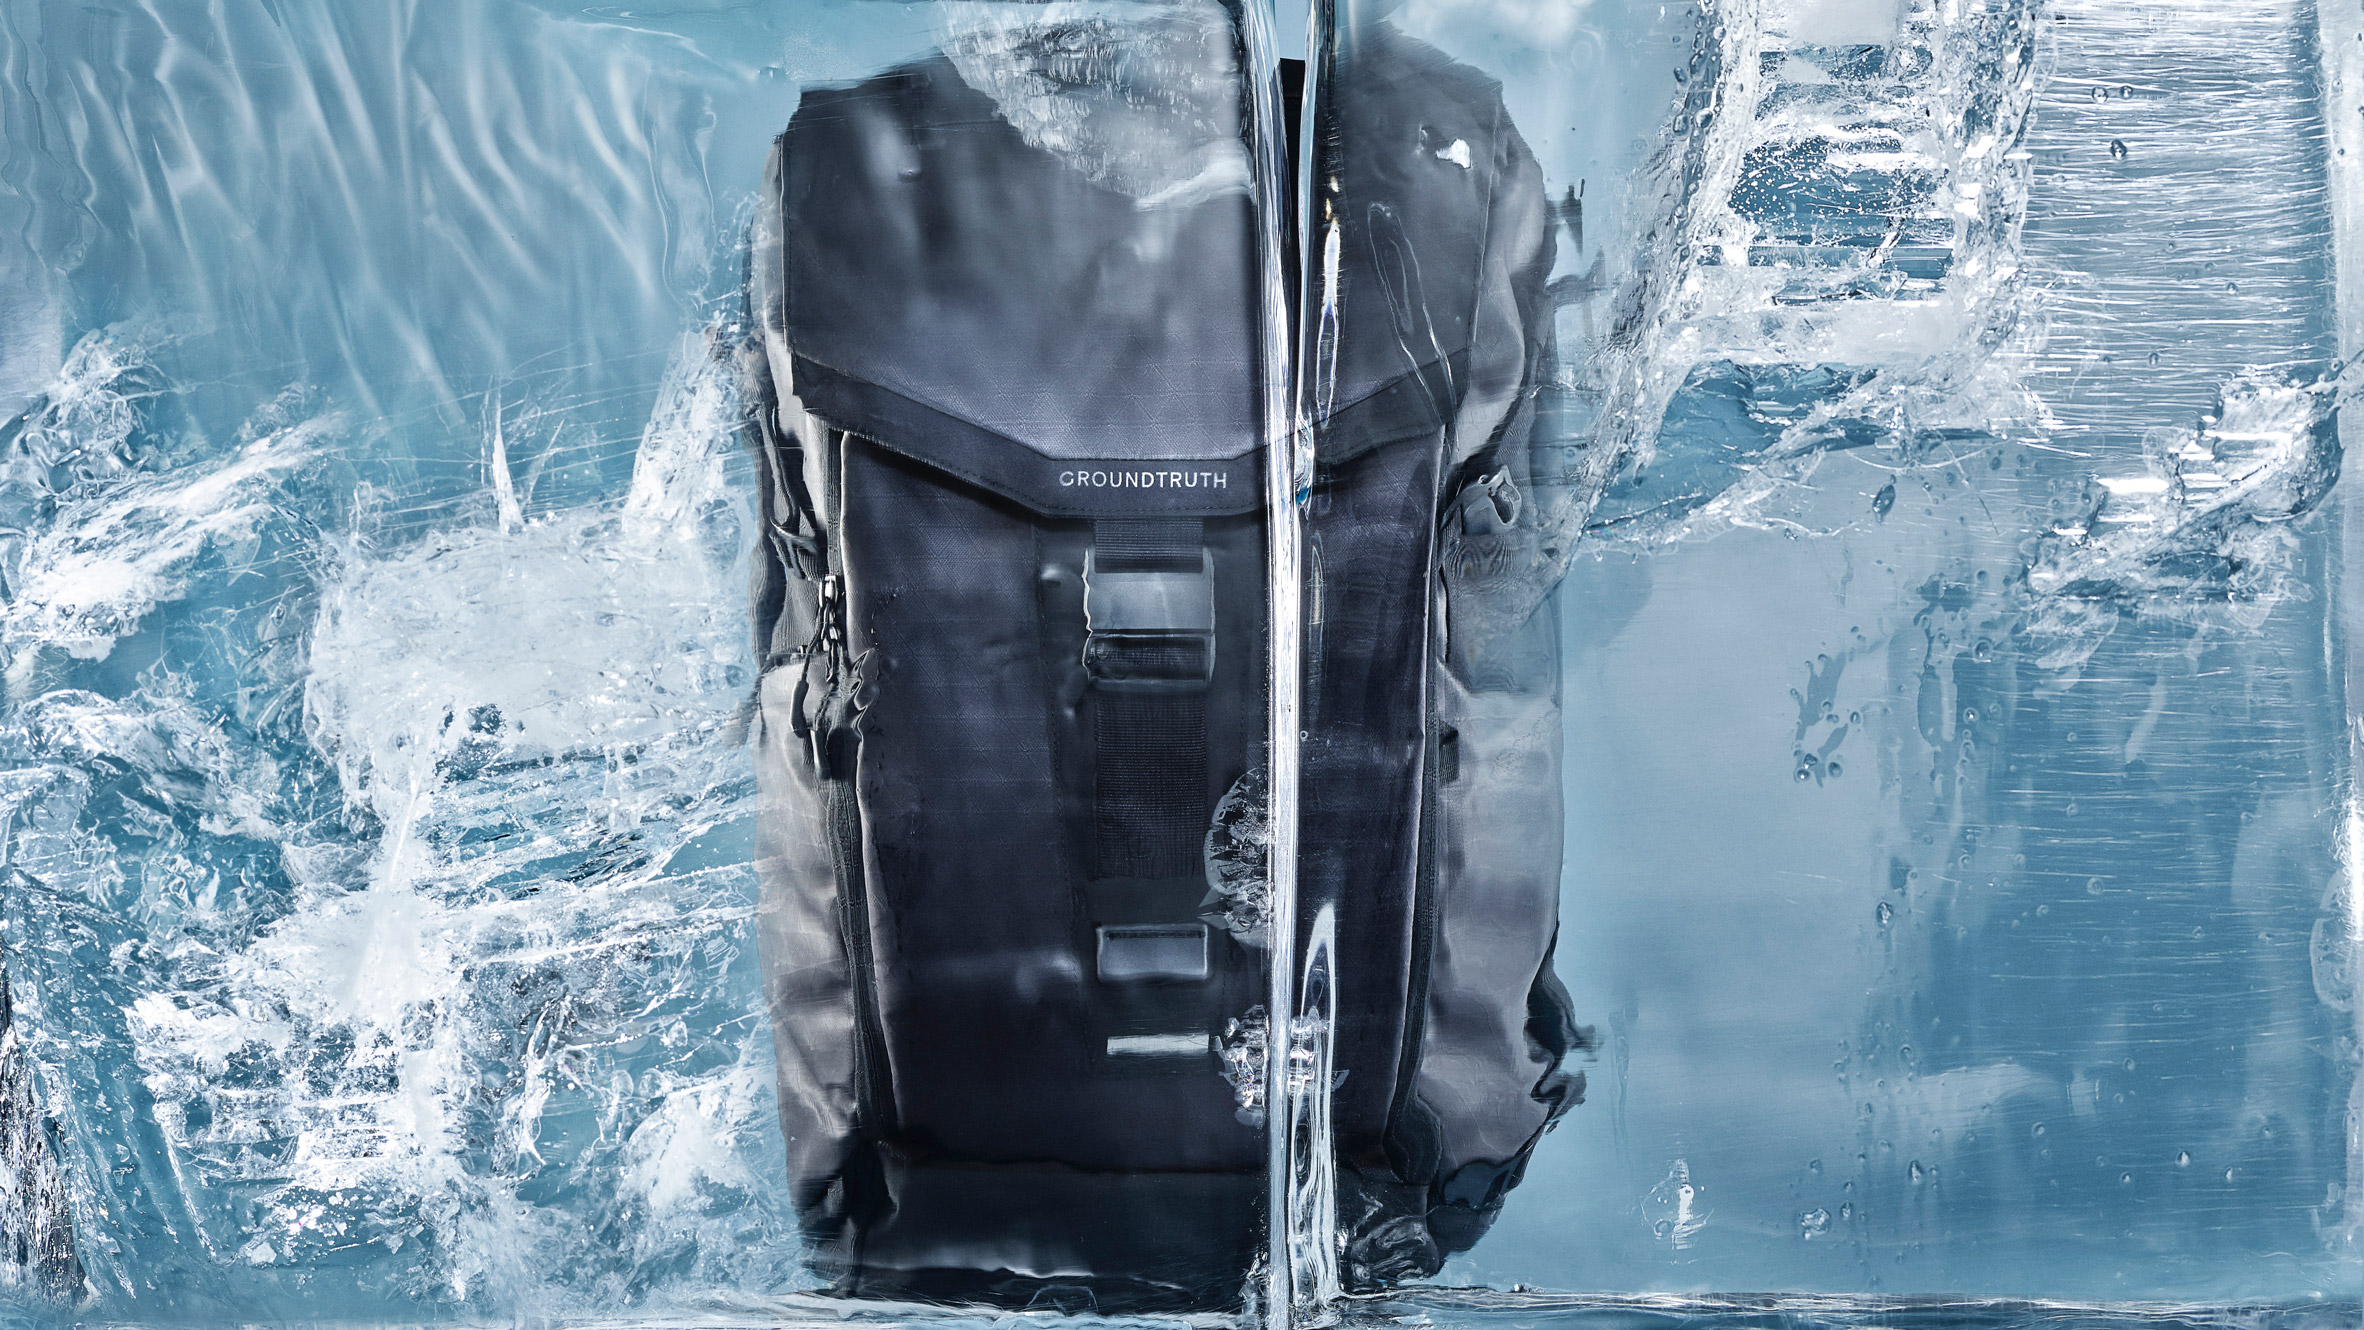 RIKR is a recycled plastic backpack by Groundtruth that can withstand Arctic conditions